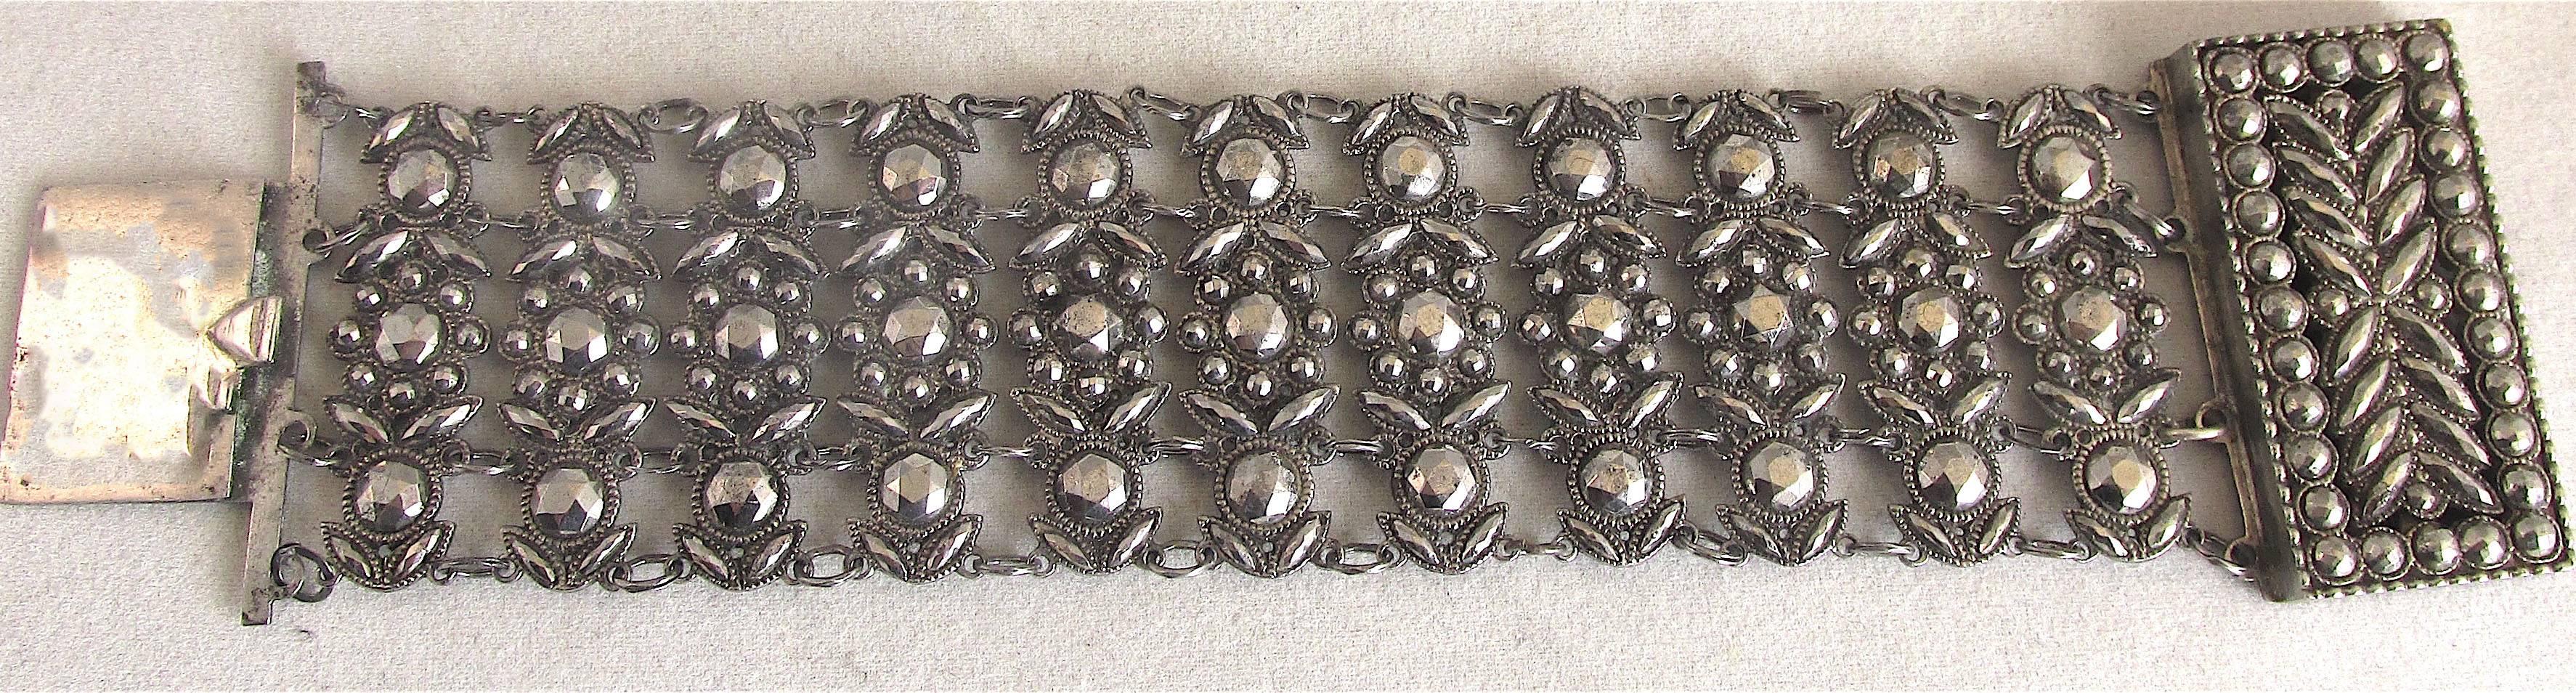 Georgian cut steel cuff bracelet dating to c.1800. Cut steel jewelry is made of tiny steel studs mounted into a base plate. It originated in the village of Woodstock in Oxfordshire. The studs were faceted to reflect light and give off a brilliance